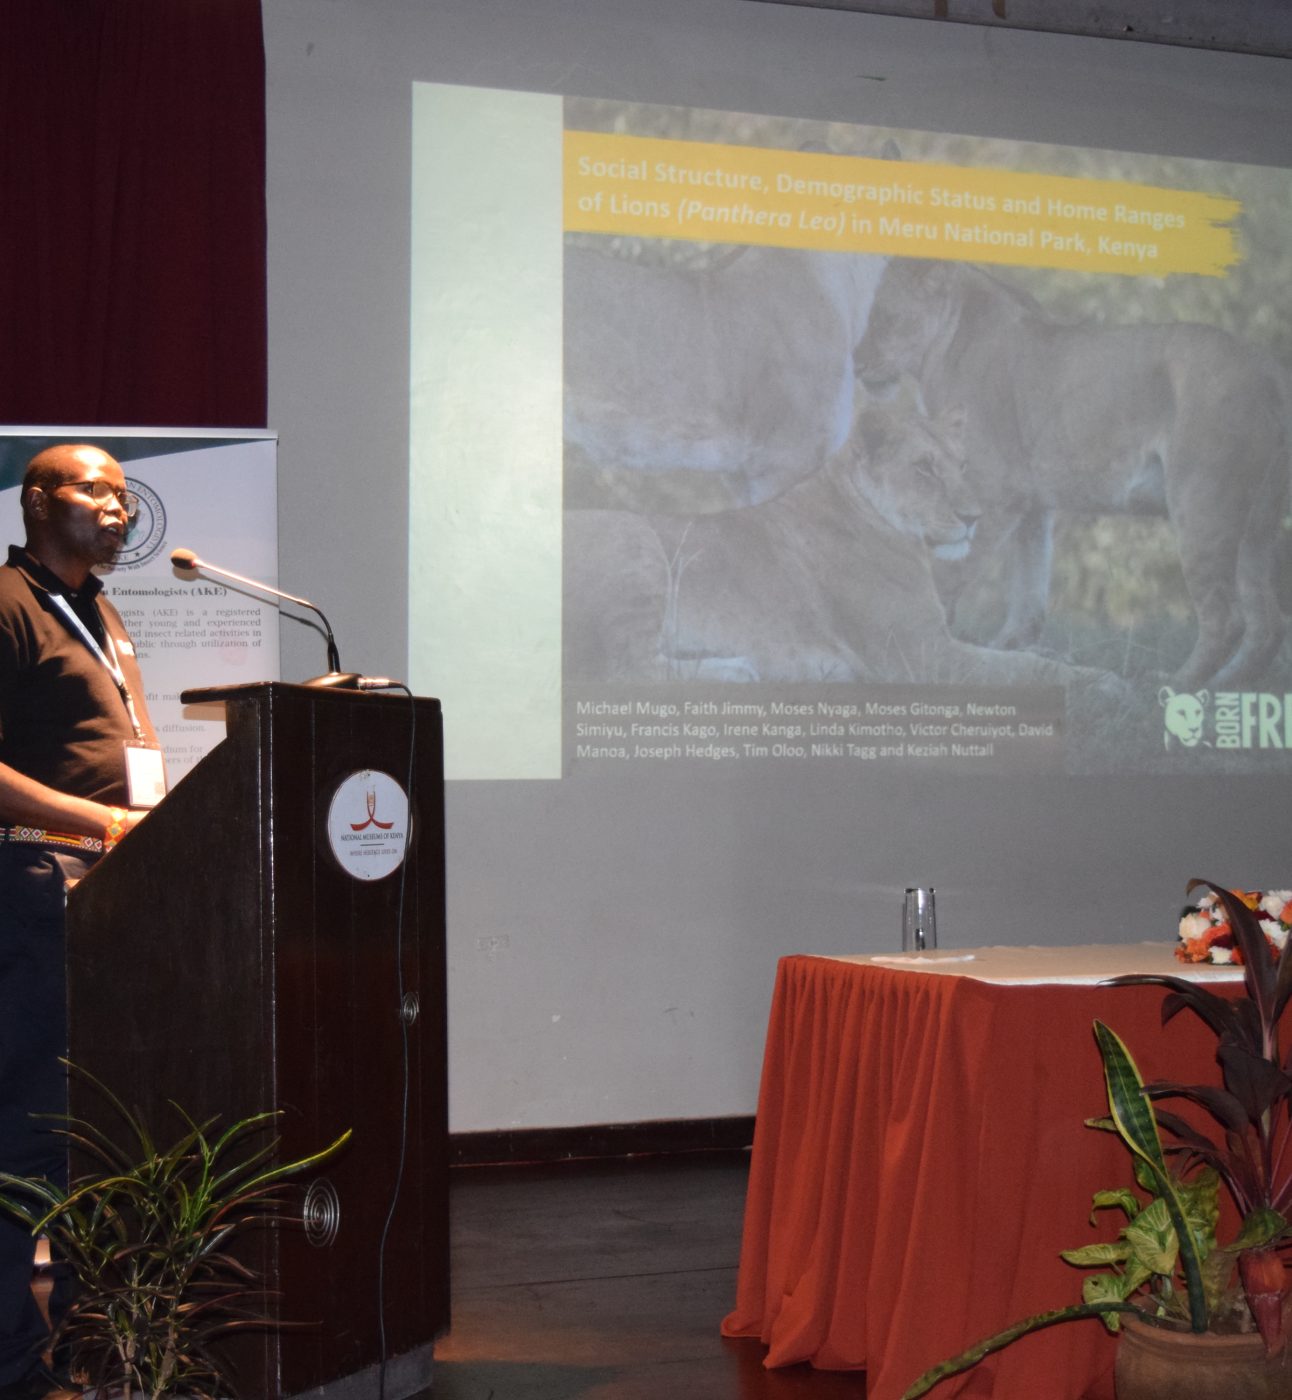 Michael Mugo, Pride of Meru Programme Manager, speaking at the National Museums of Kenya conference